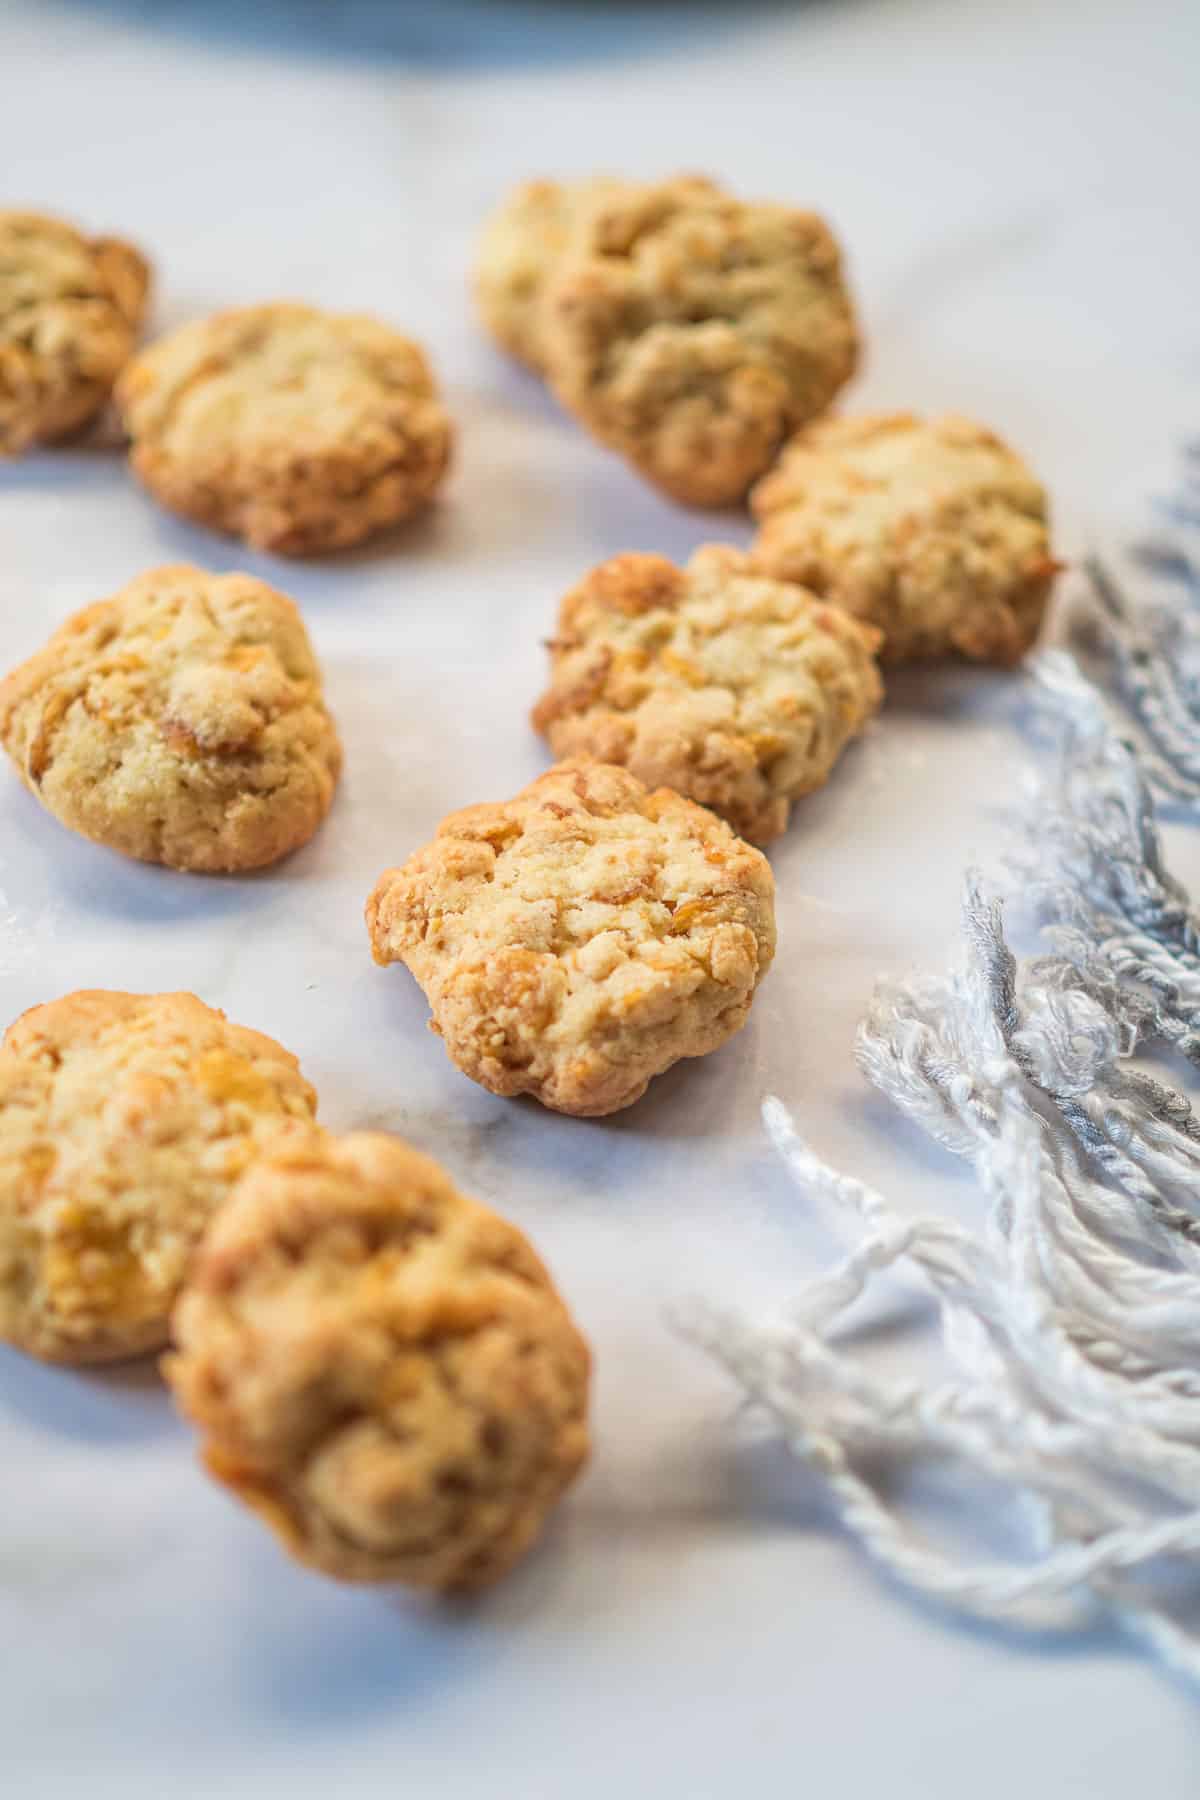 Cornflake cookies against a marble background